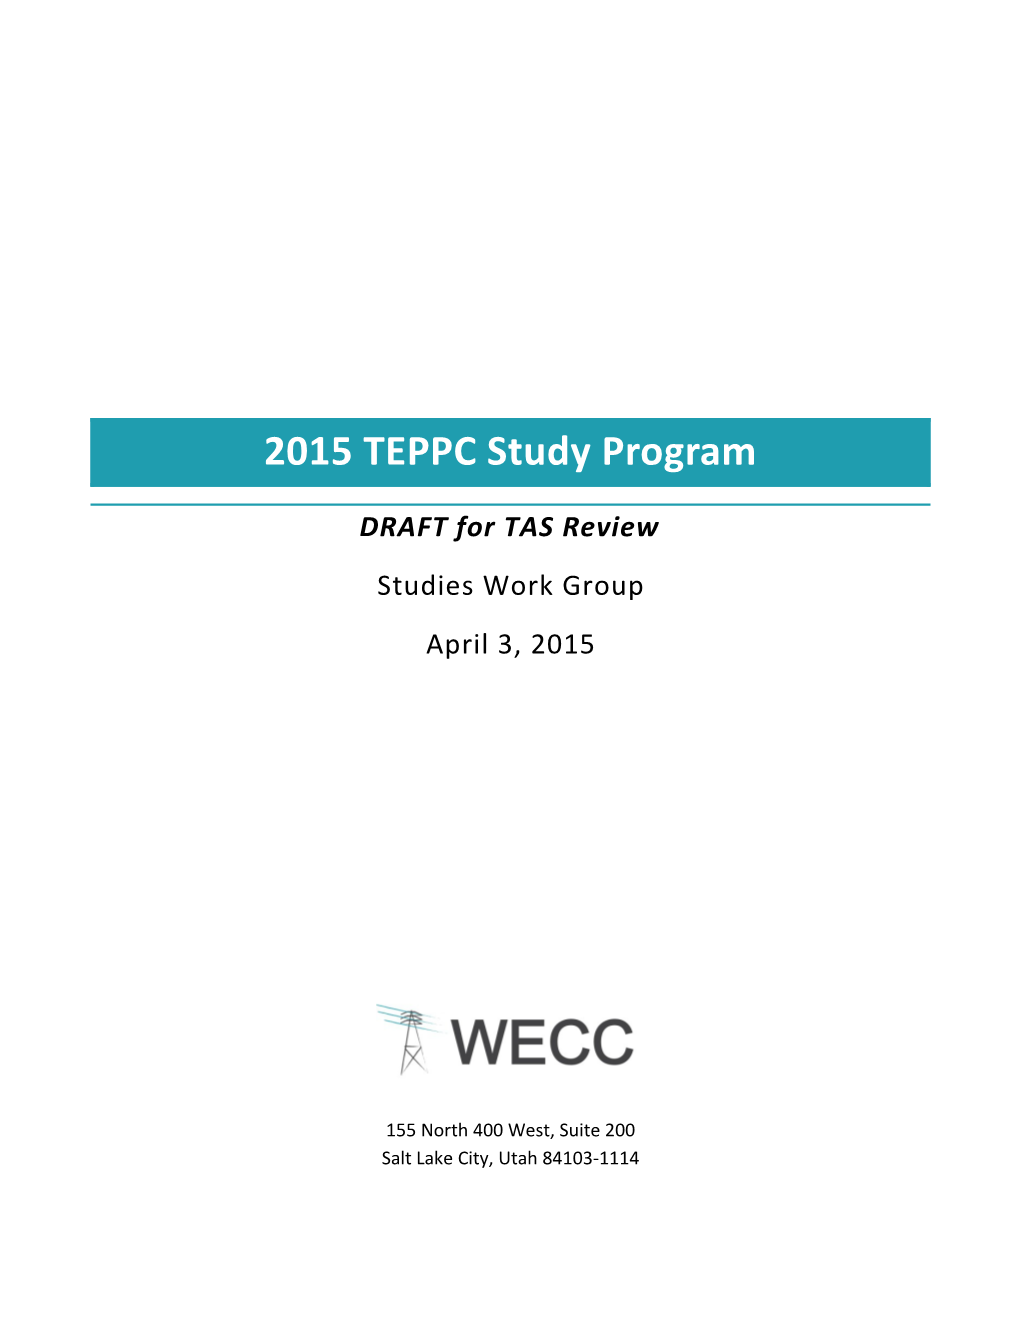 CAISO Comments to TEPPC 2015 Study Program Approval Item